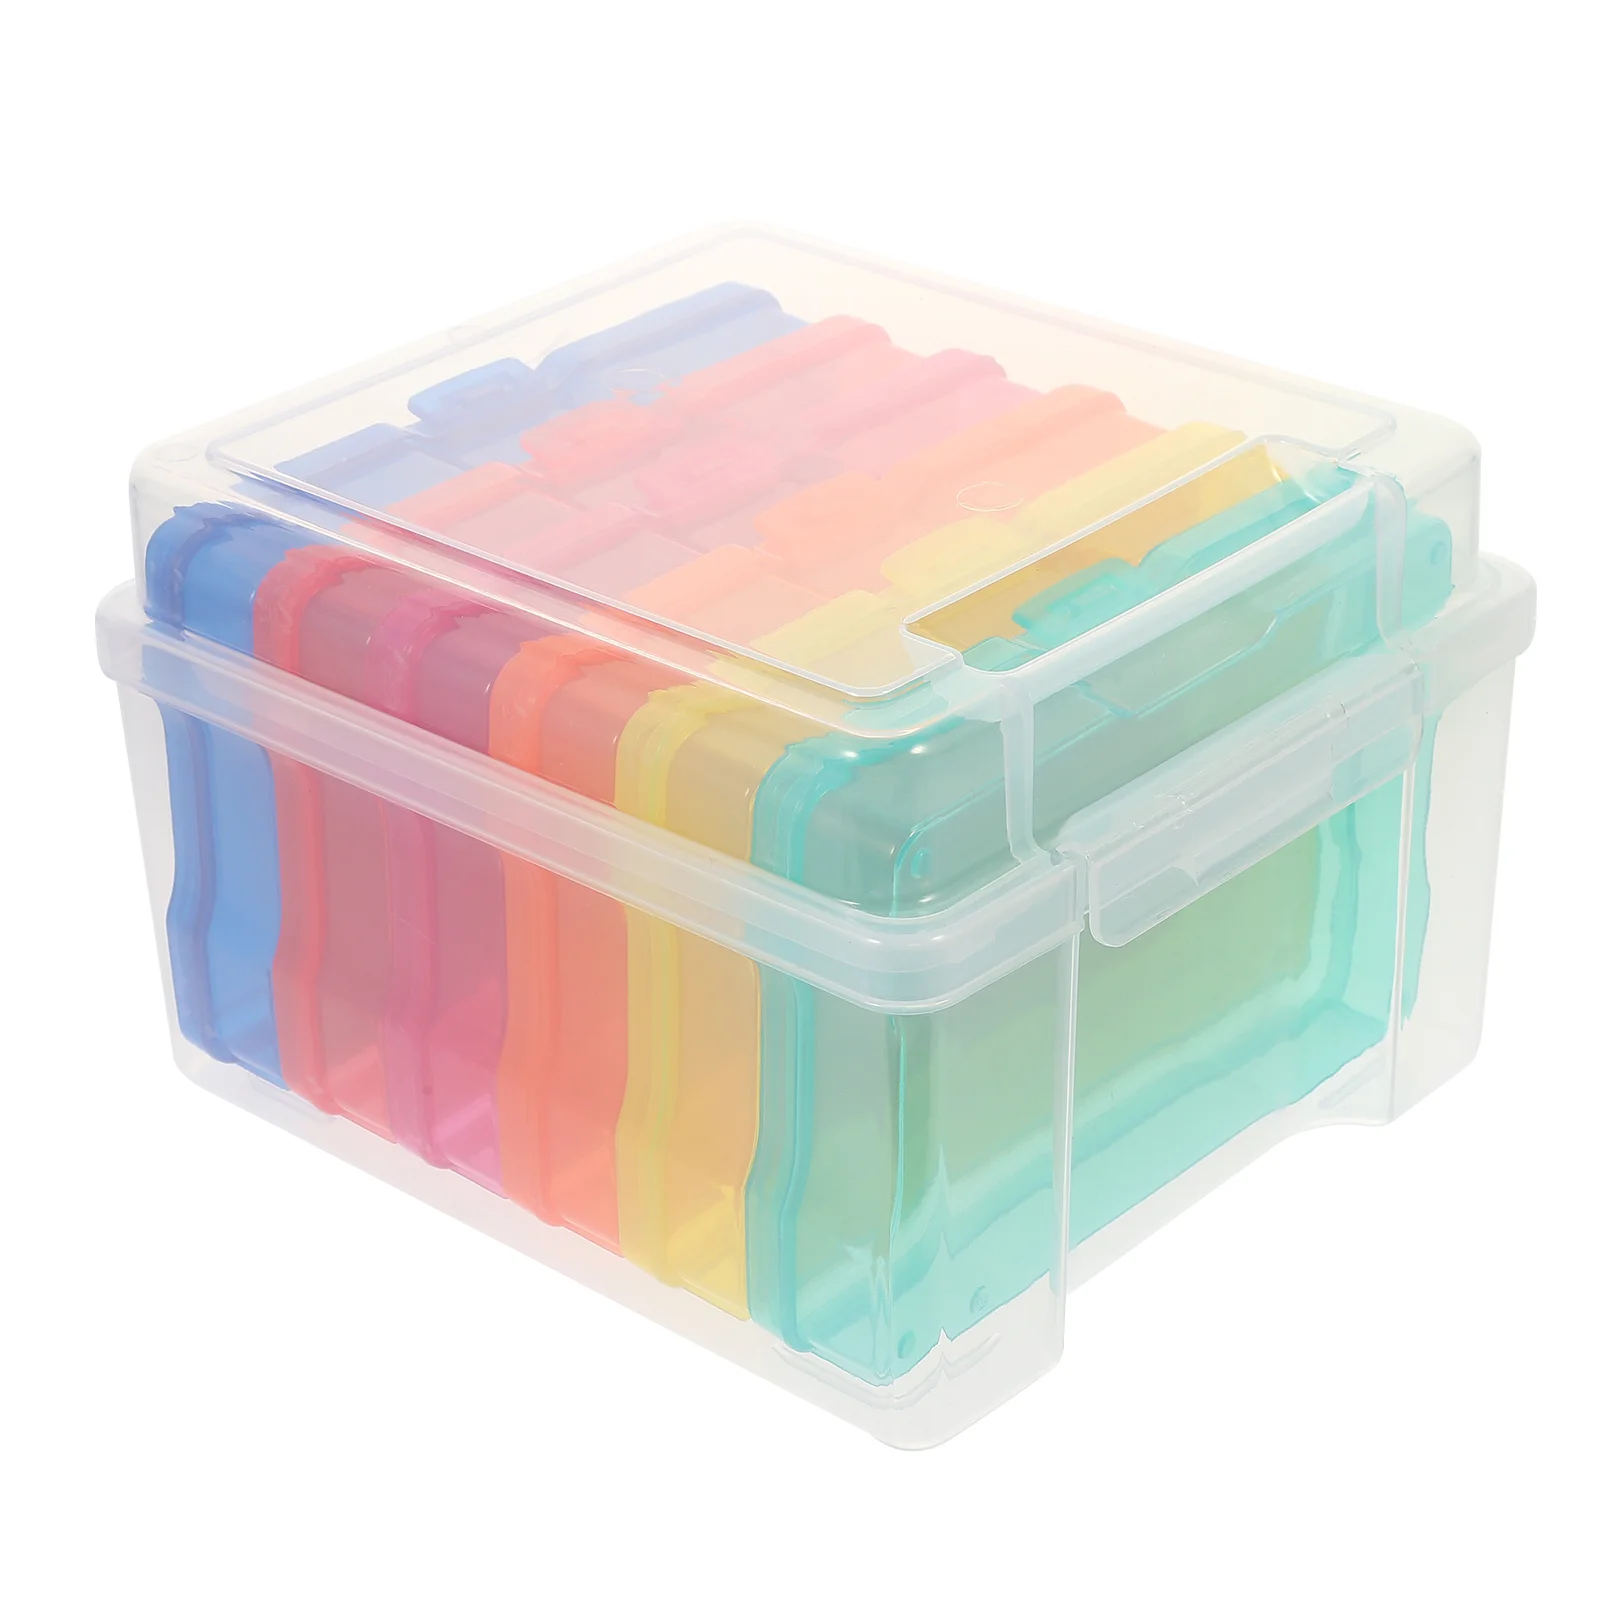 

Box Photo Storage Boxes Organizer Case Keeper Containers Photos Greeting Task Special Education Organizers Craft Holder